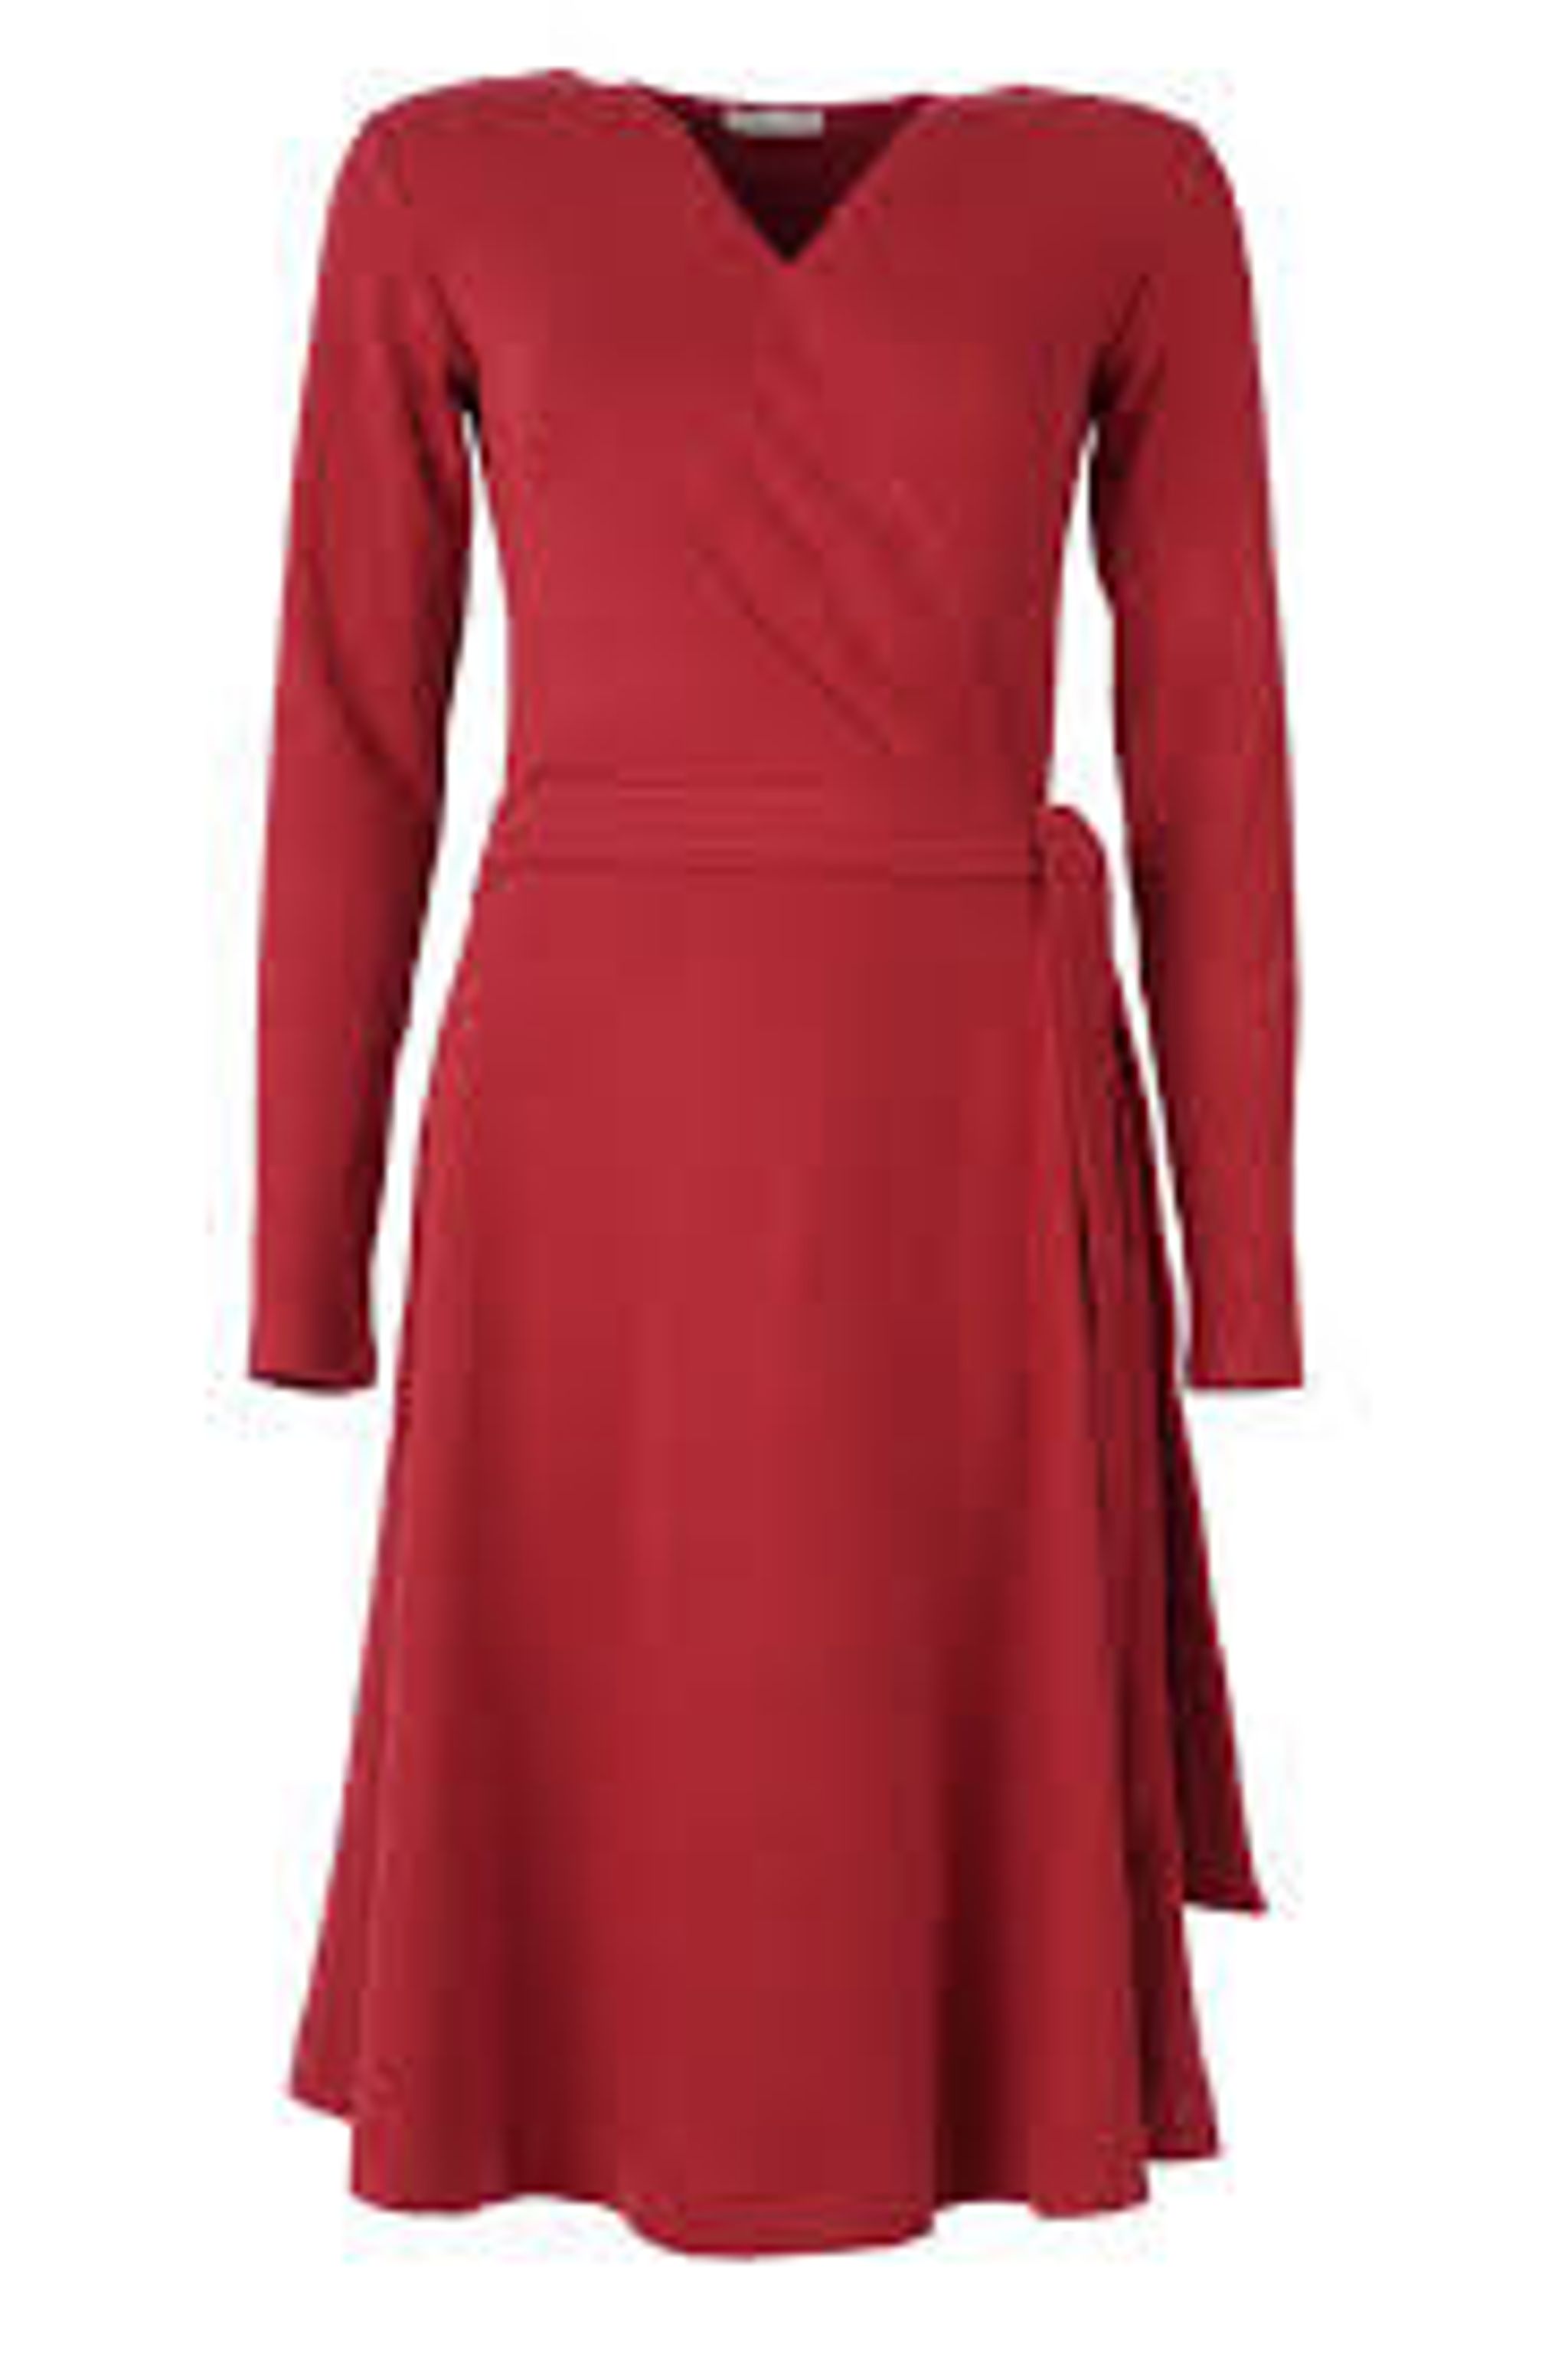 ruby red dress- casual date night outfit